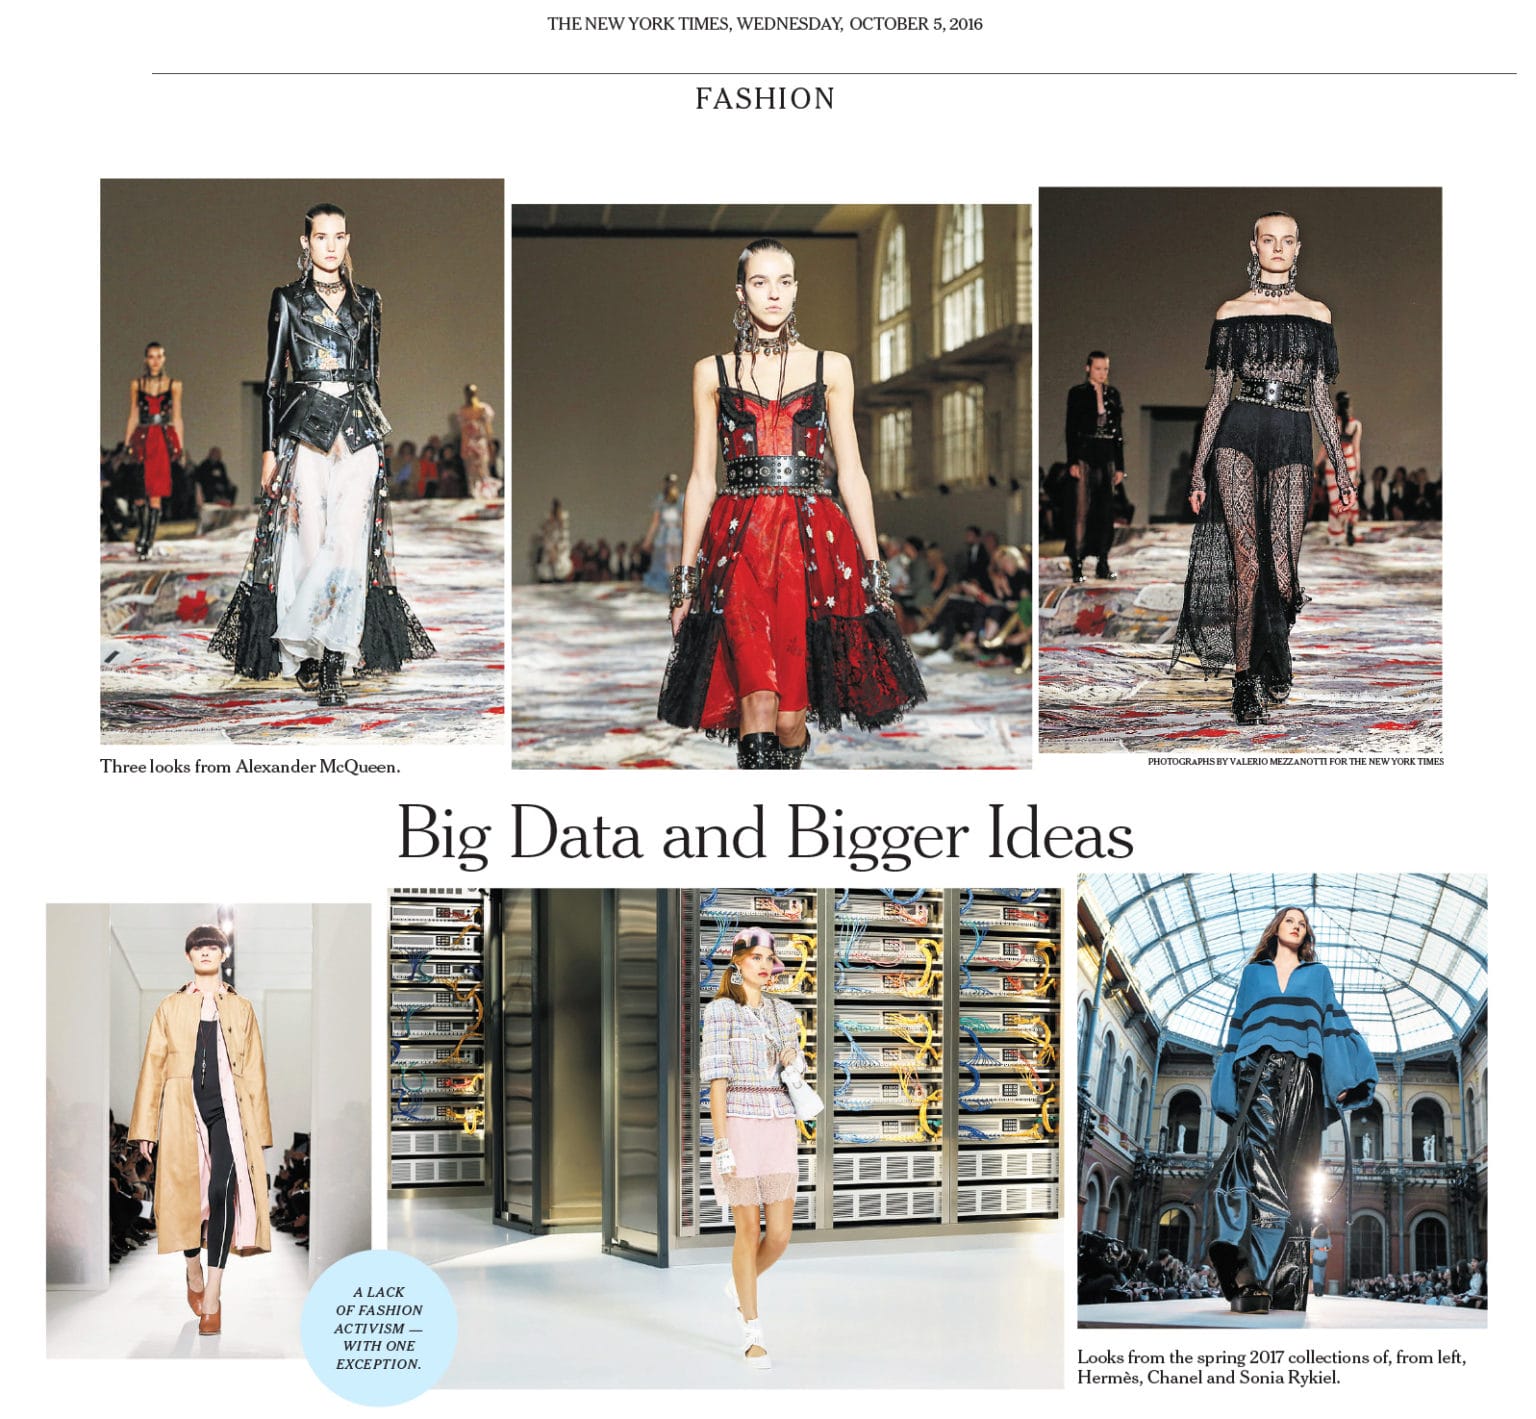 Alexander McQueen, Hermès, Chanel and Sonia Rykiel  Review, Photo by Valerio Mezzanotti for The New York Times